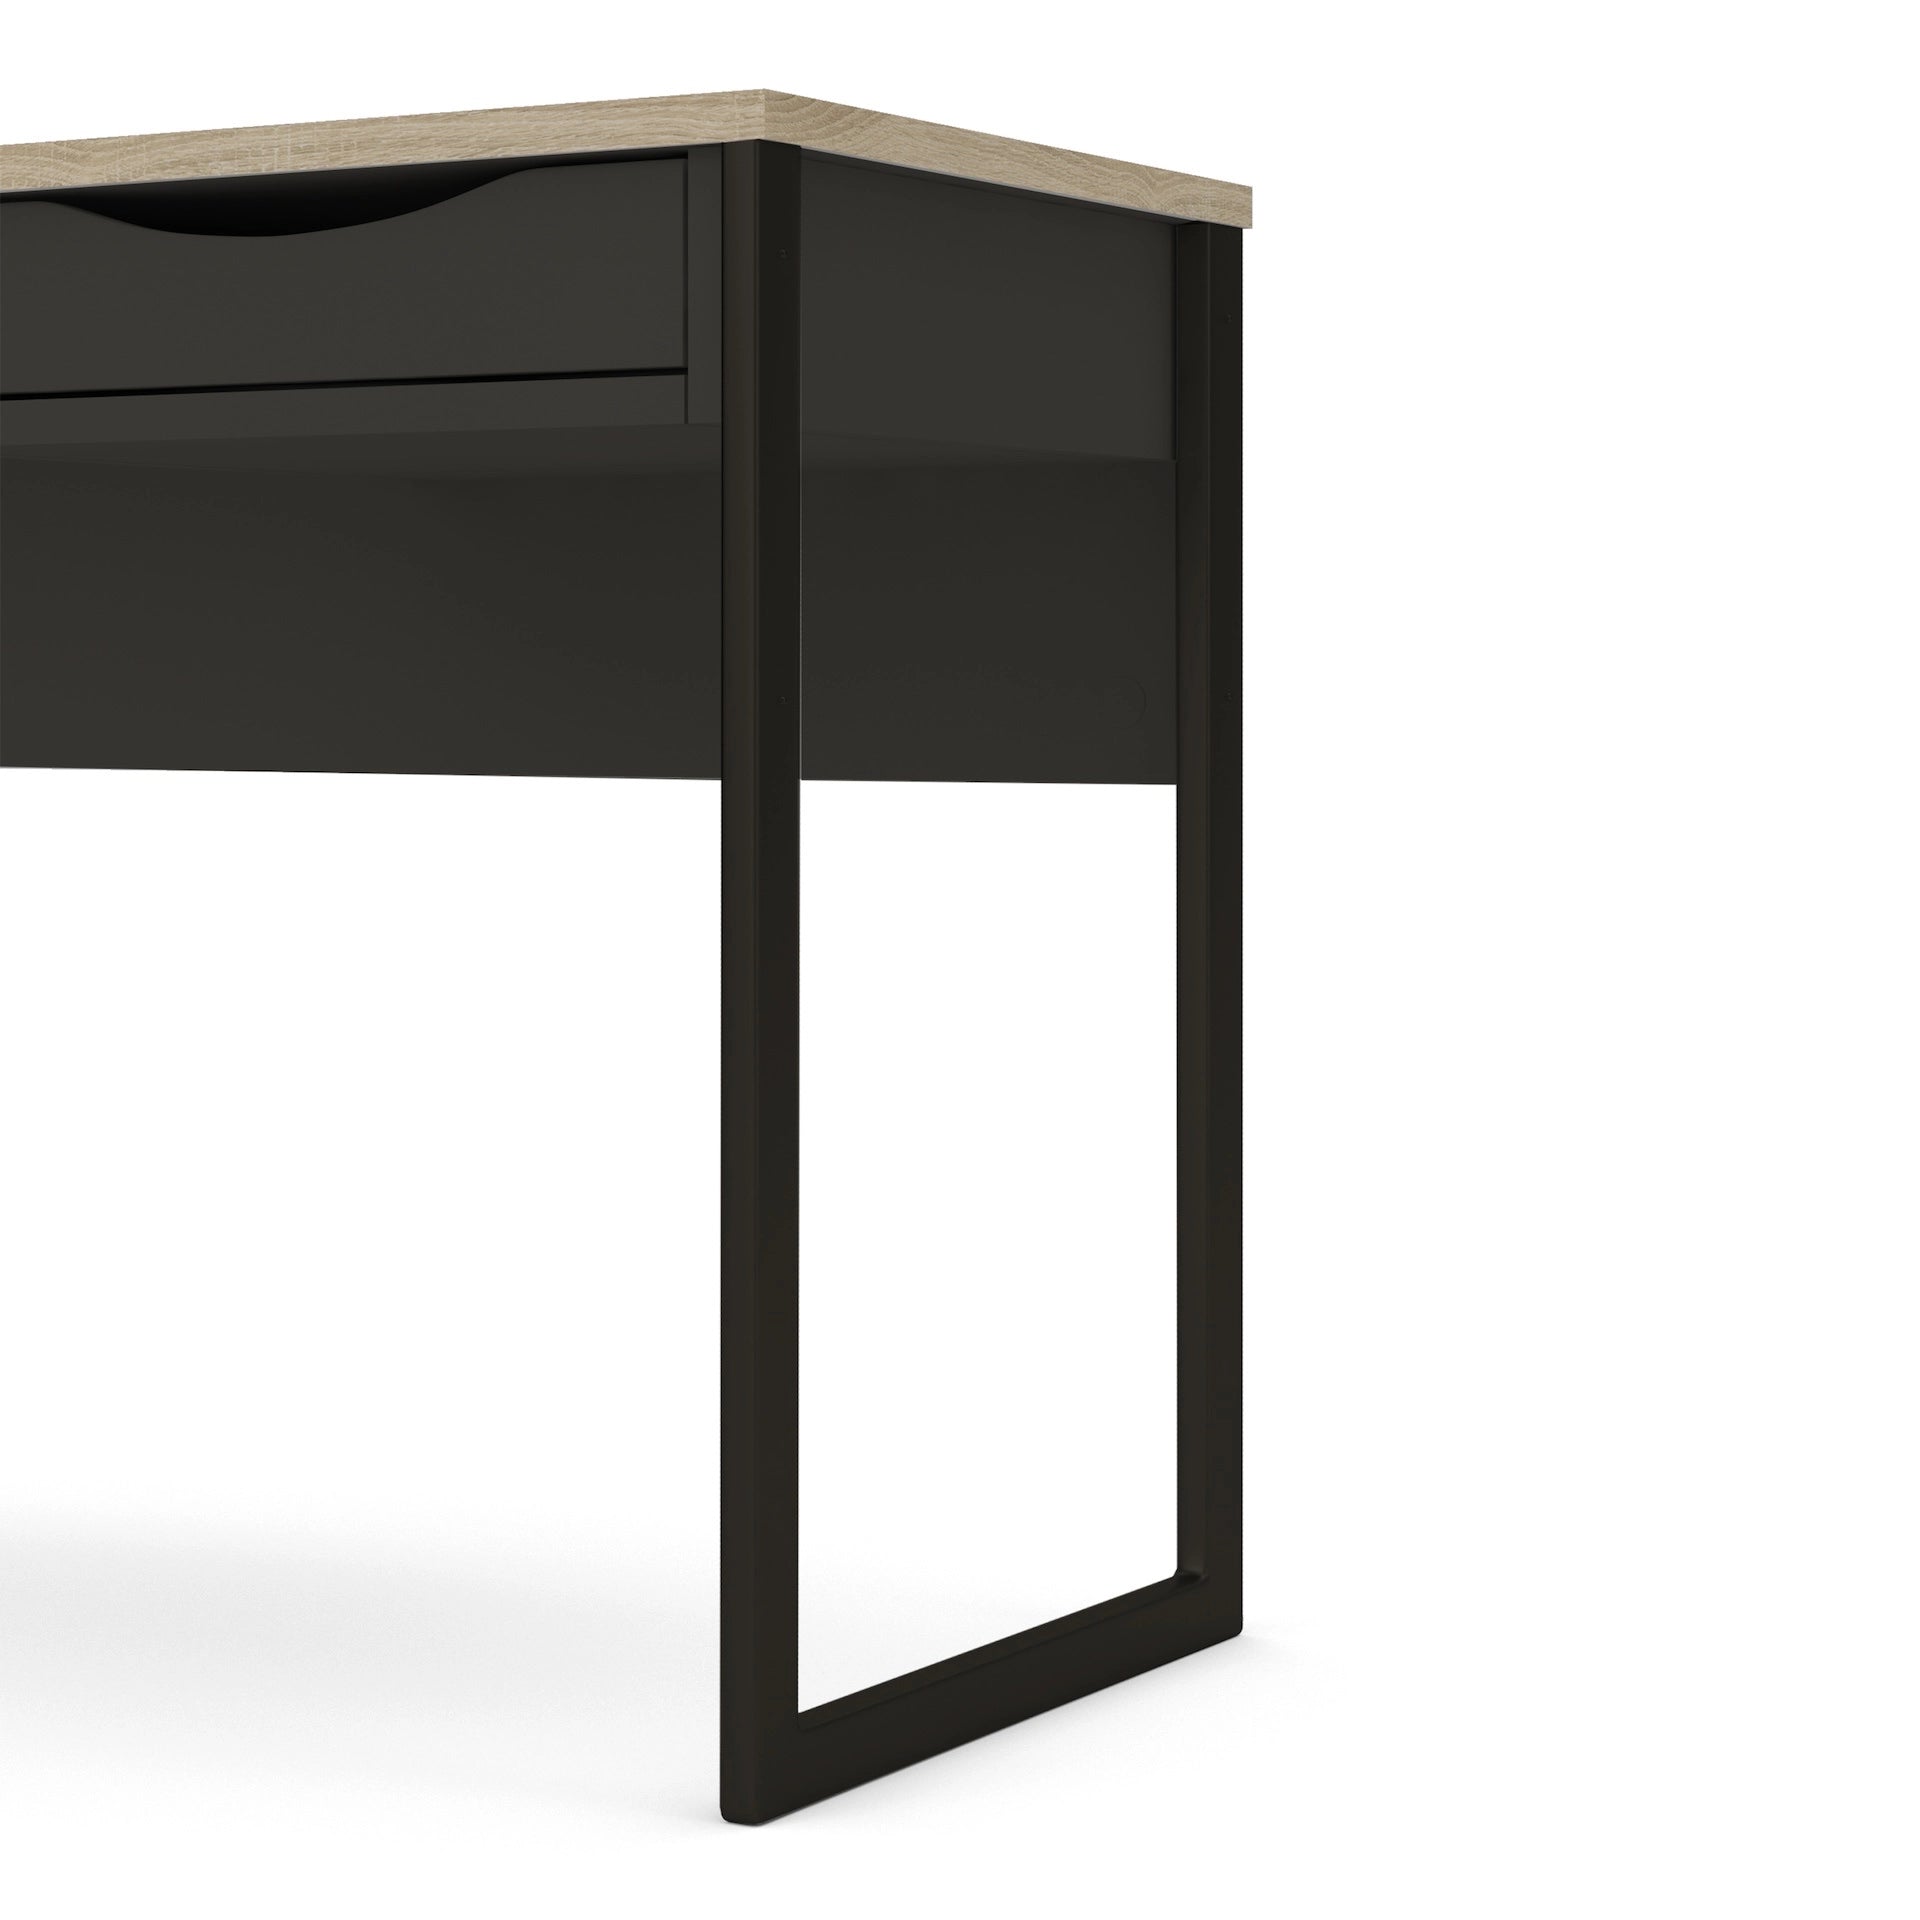 Furniture To Go Function Plus Desk 1 Drawer in Black with Oak Trim